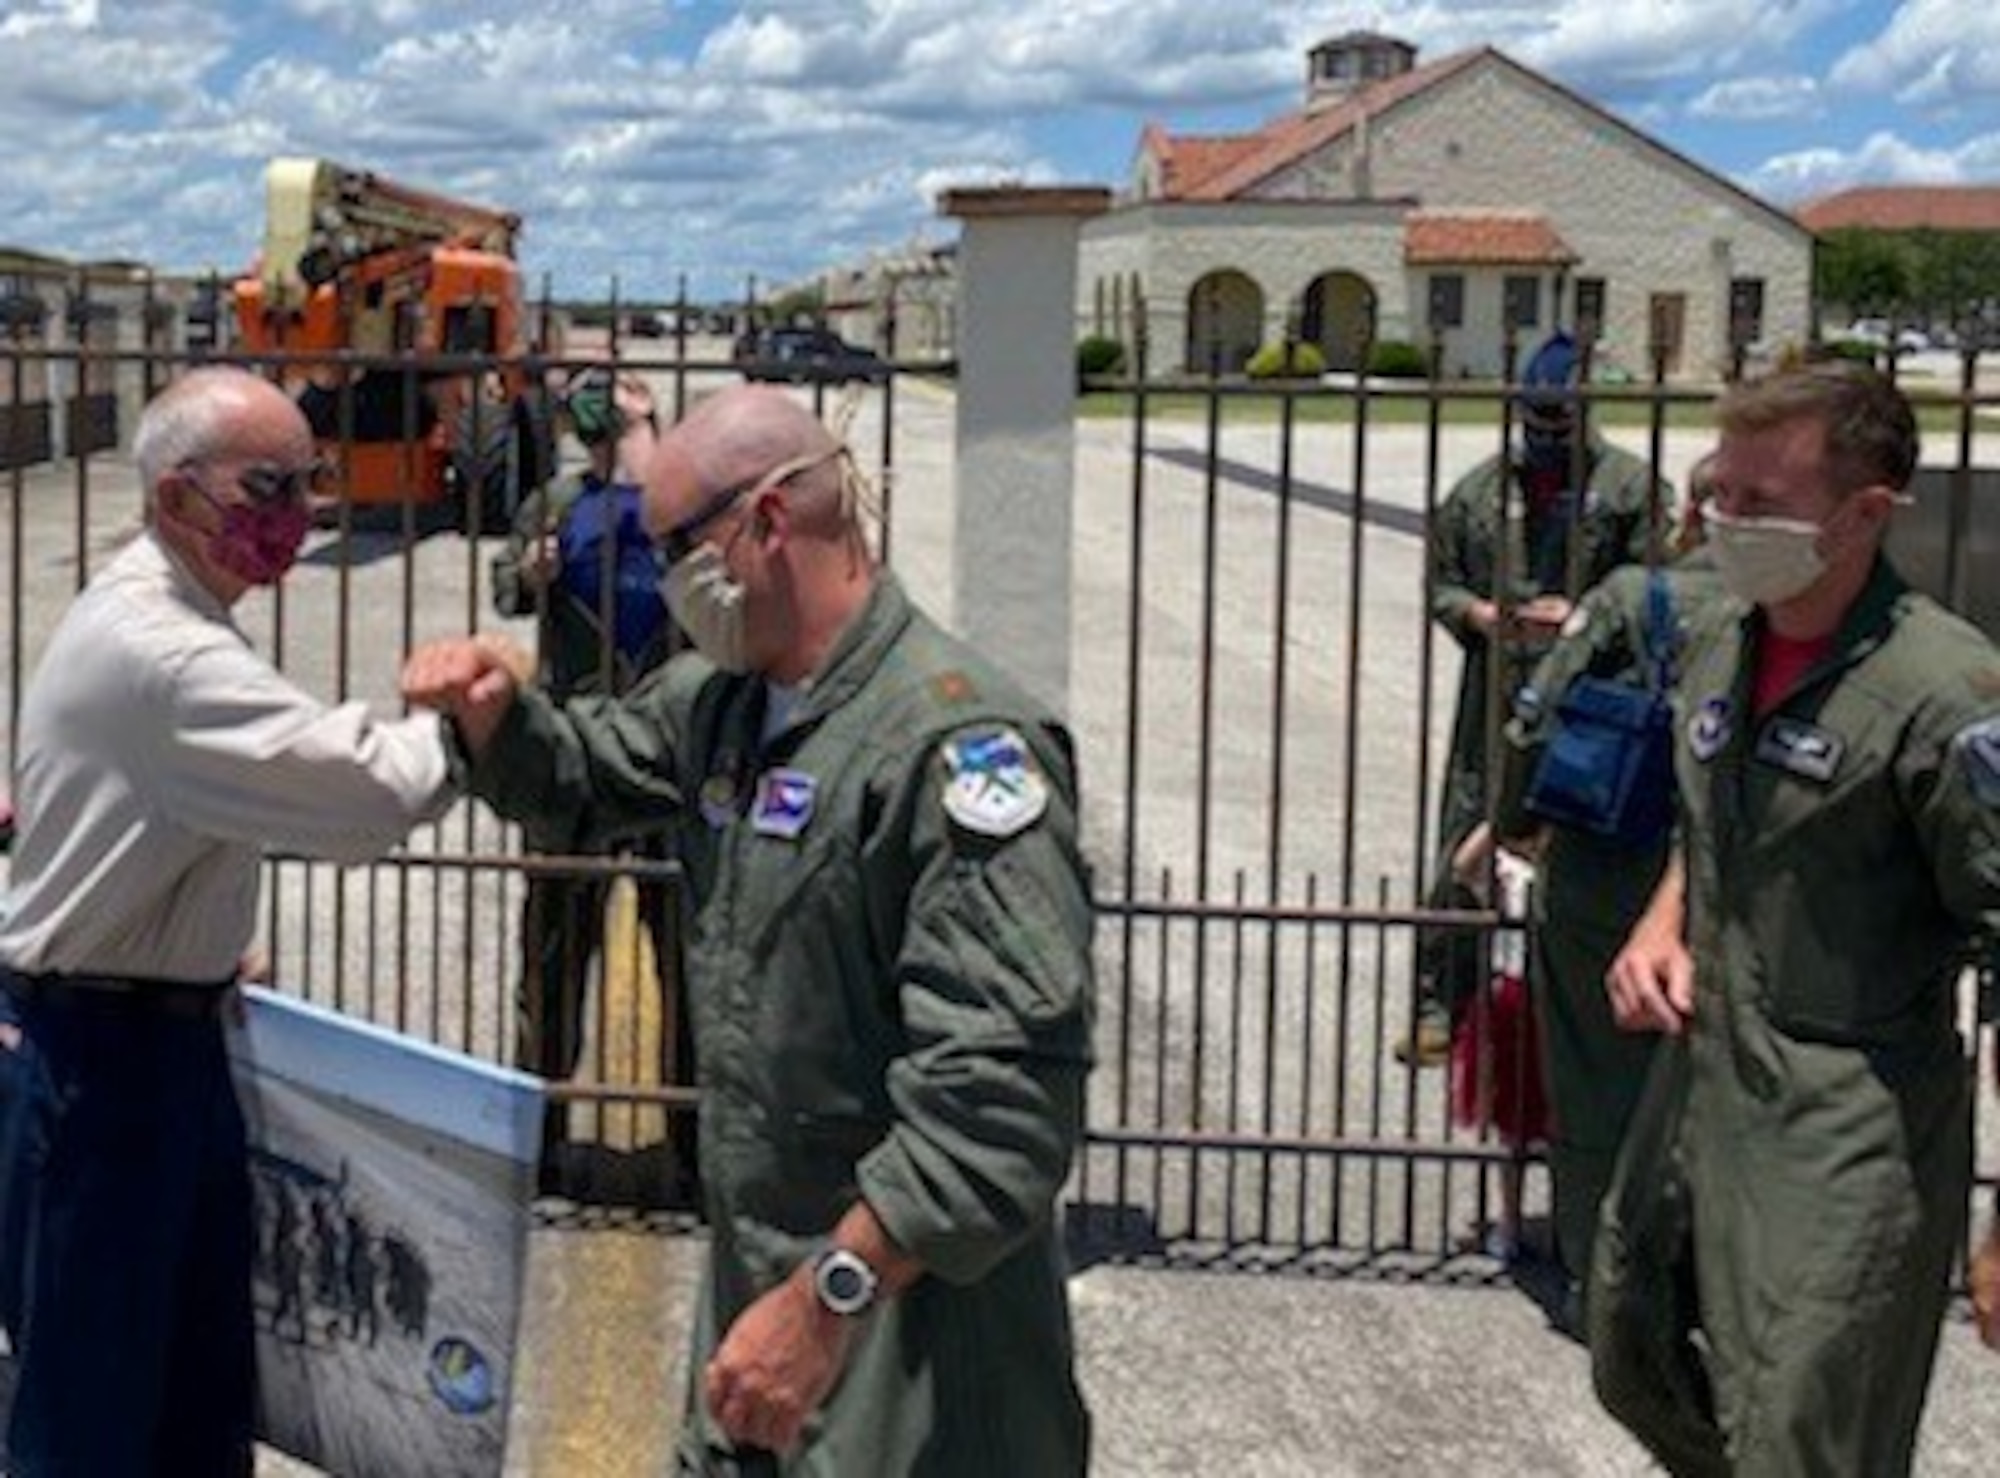 T-6 pilots assigned to the 340th Flying Training Group's 39th Flying Training Squadron and the 12th Flying Training Wing's 559th FTS bump elbows (the pandemic handshake) with retiring Joint Base San Antonio-Randolph, Texas T-6 maintainer Carl Powers, who retired May 31 after nearly 50 years of uniformed and civilian service. (U.S. Air Force photo)